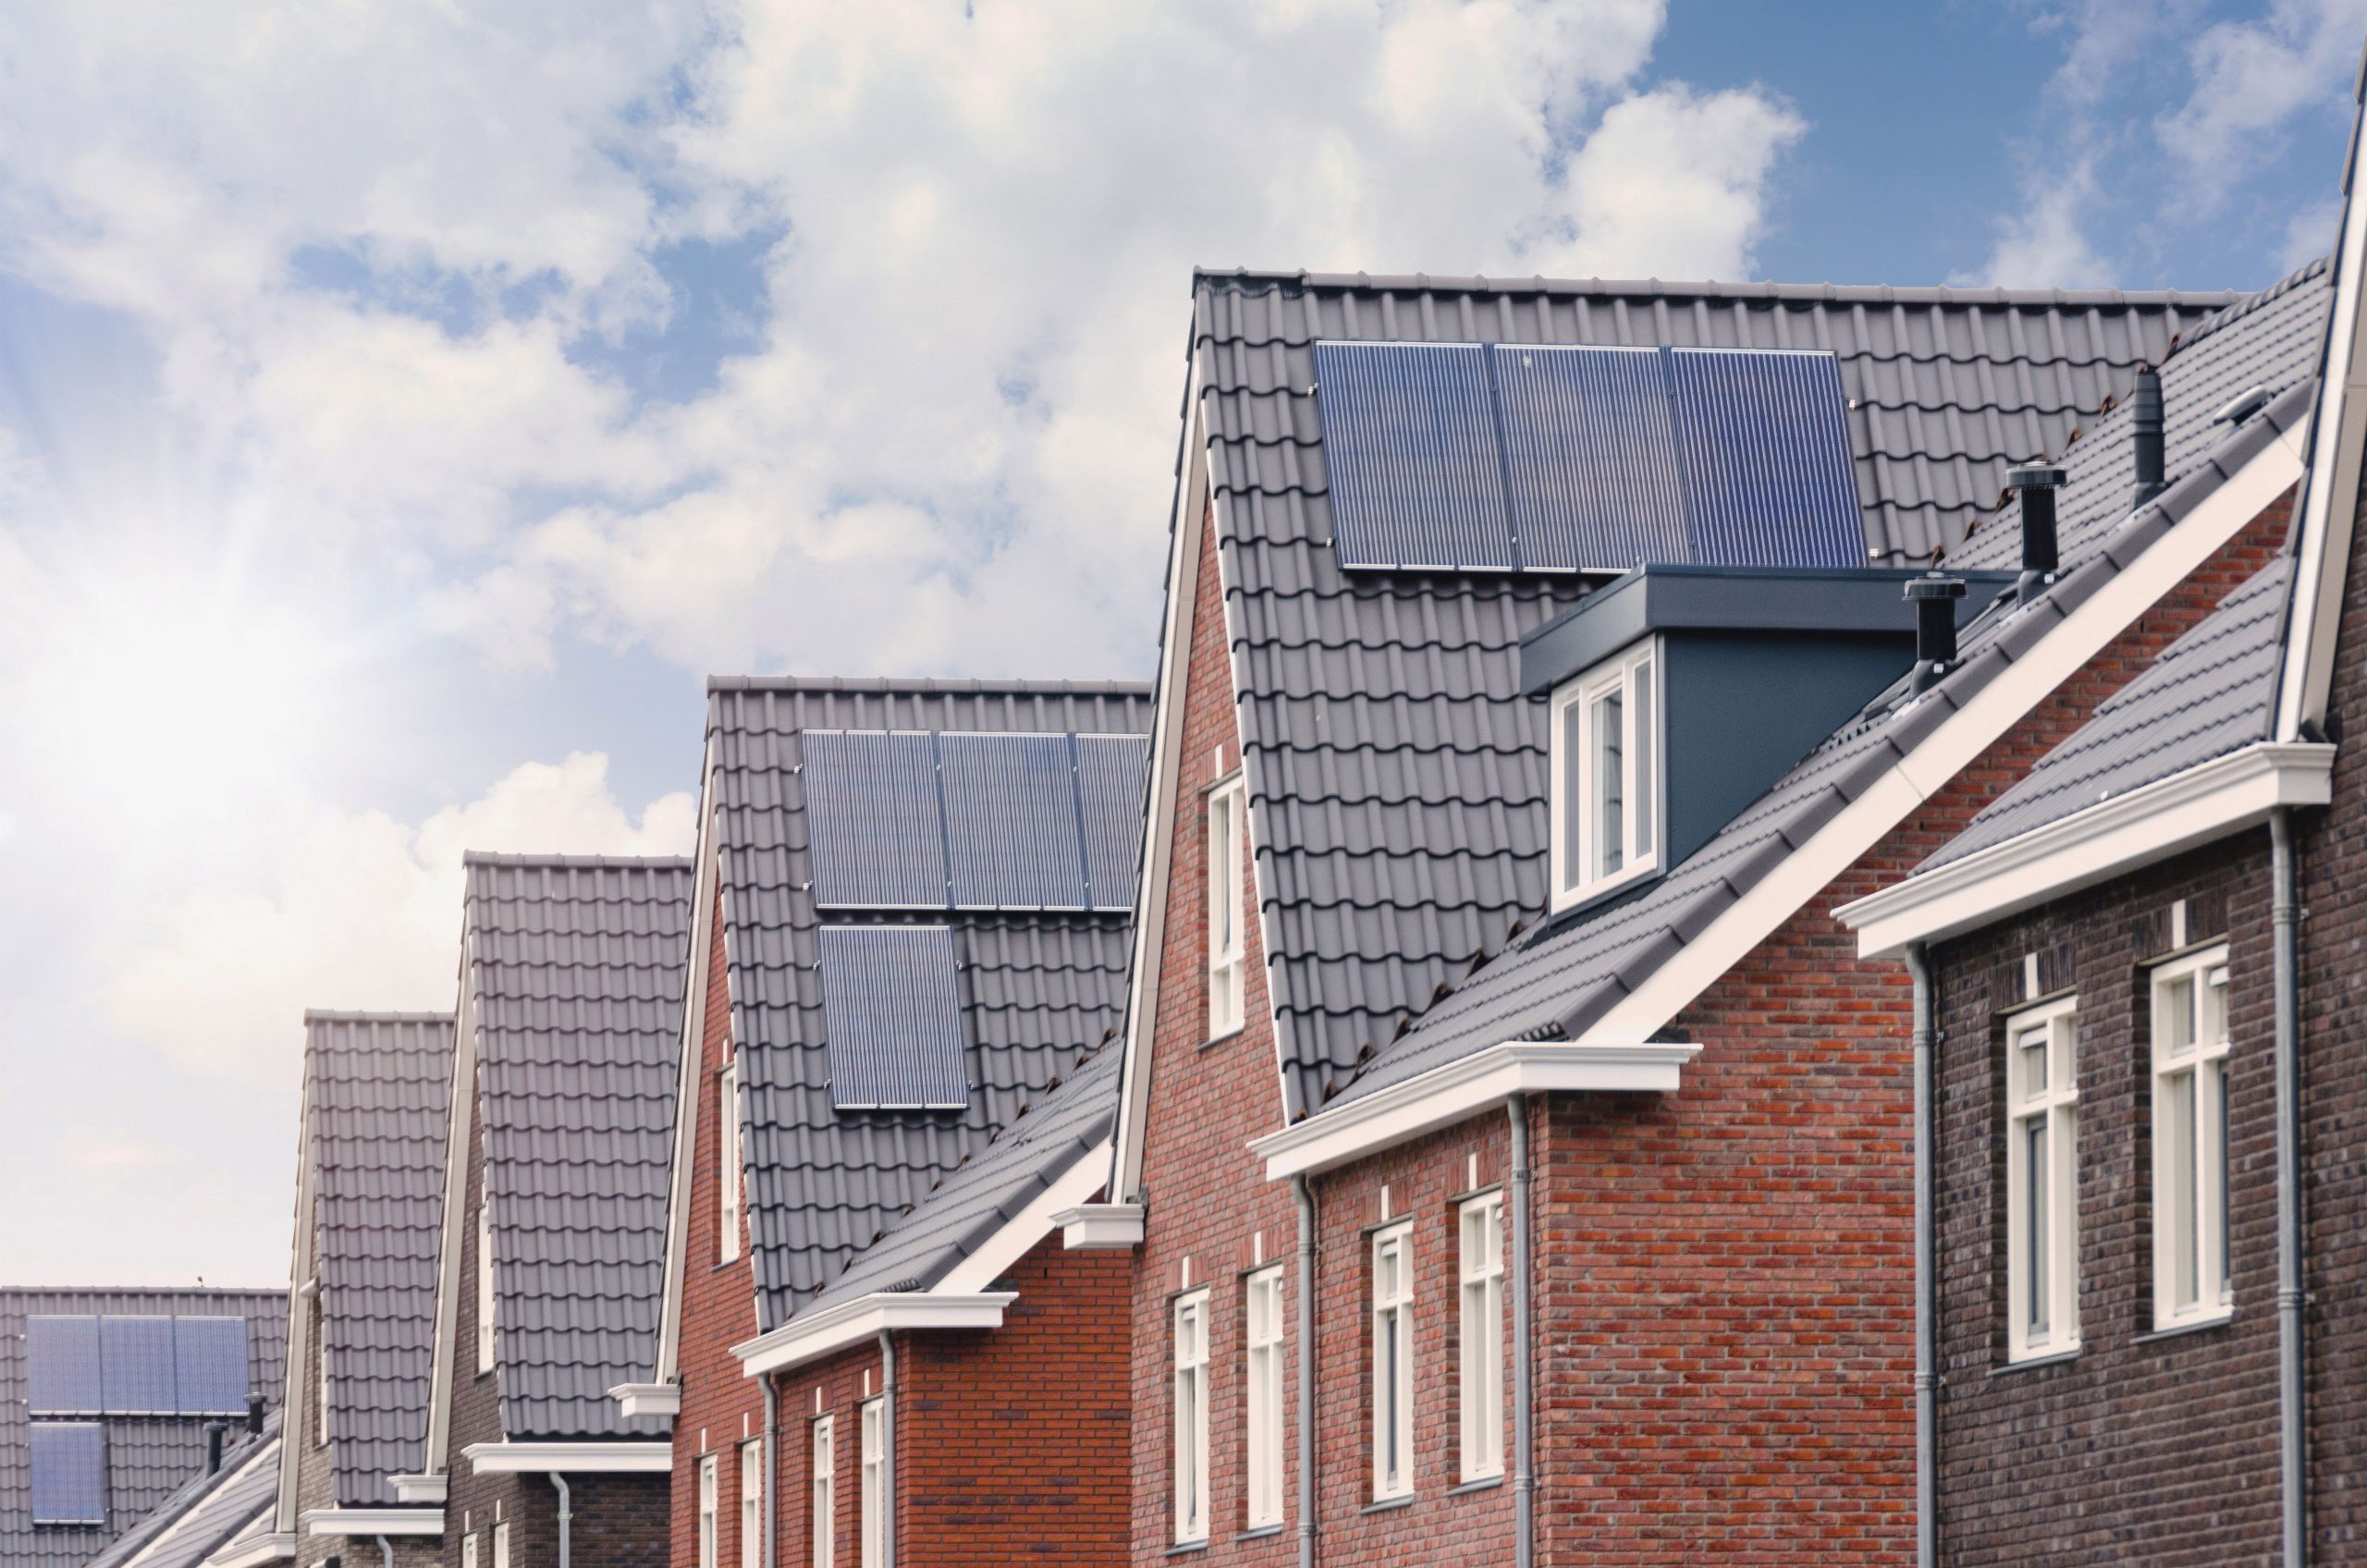 New houses with solar panels